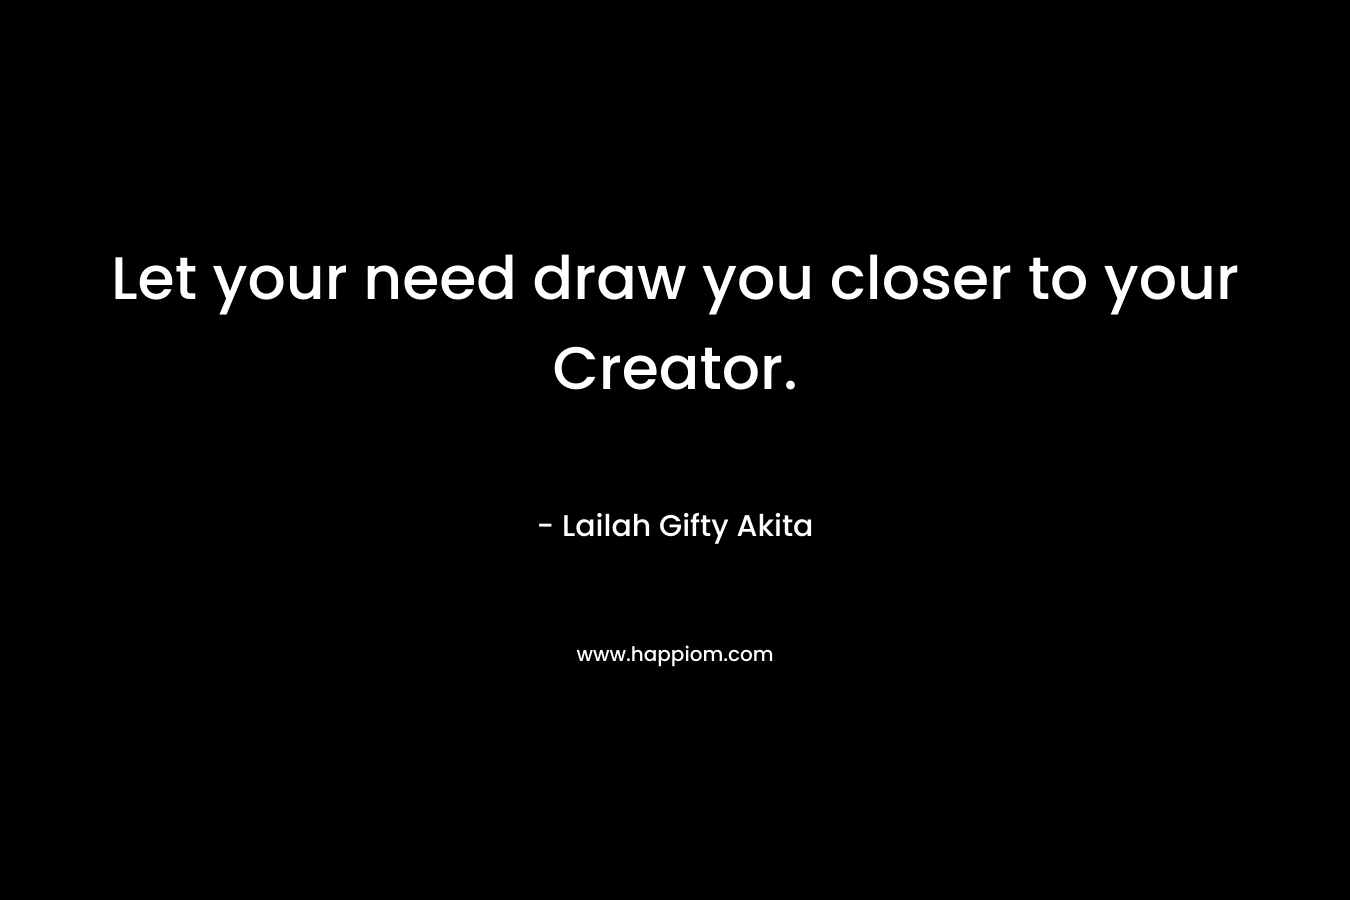 Let your need draw you closer to your Creator.